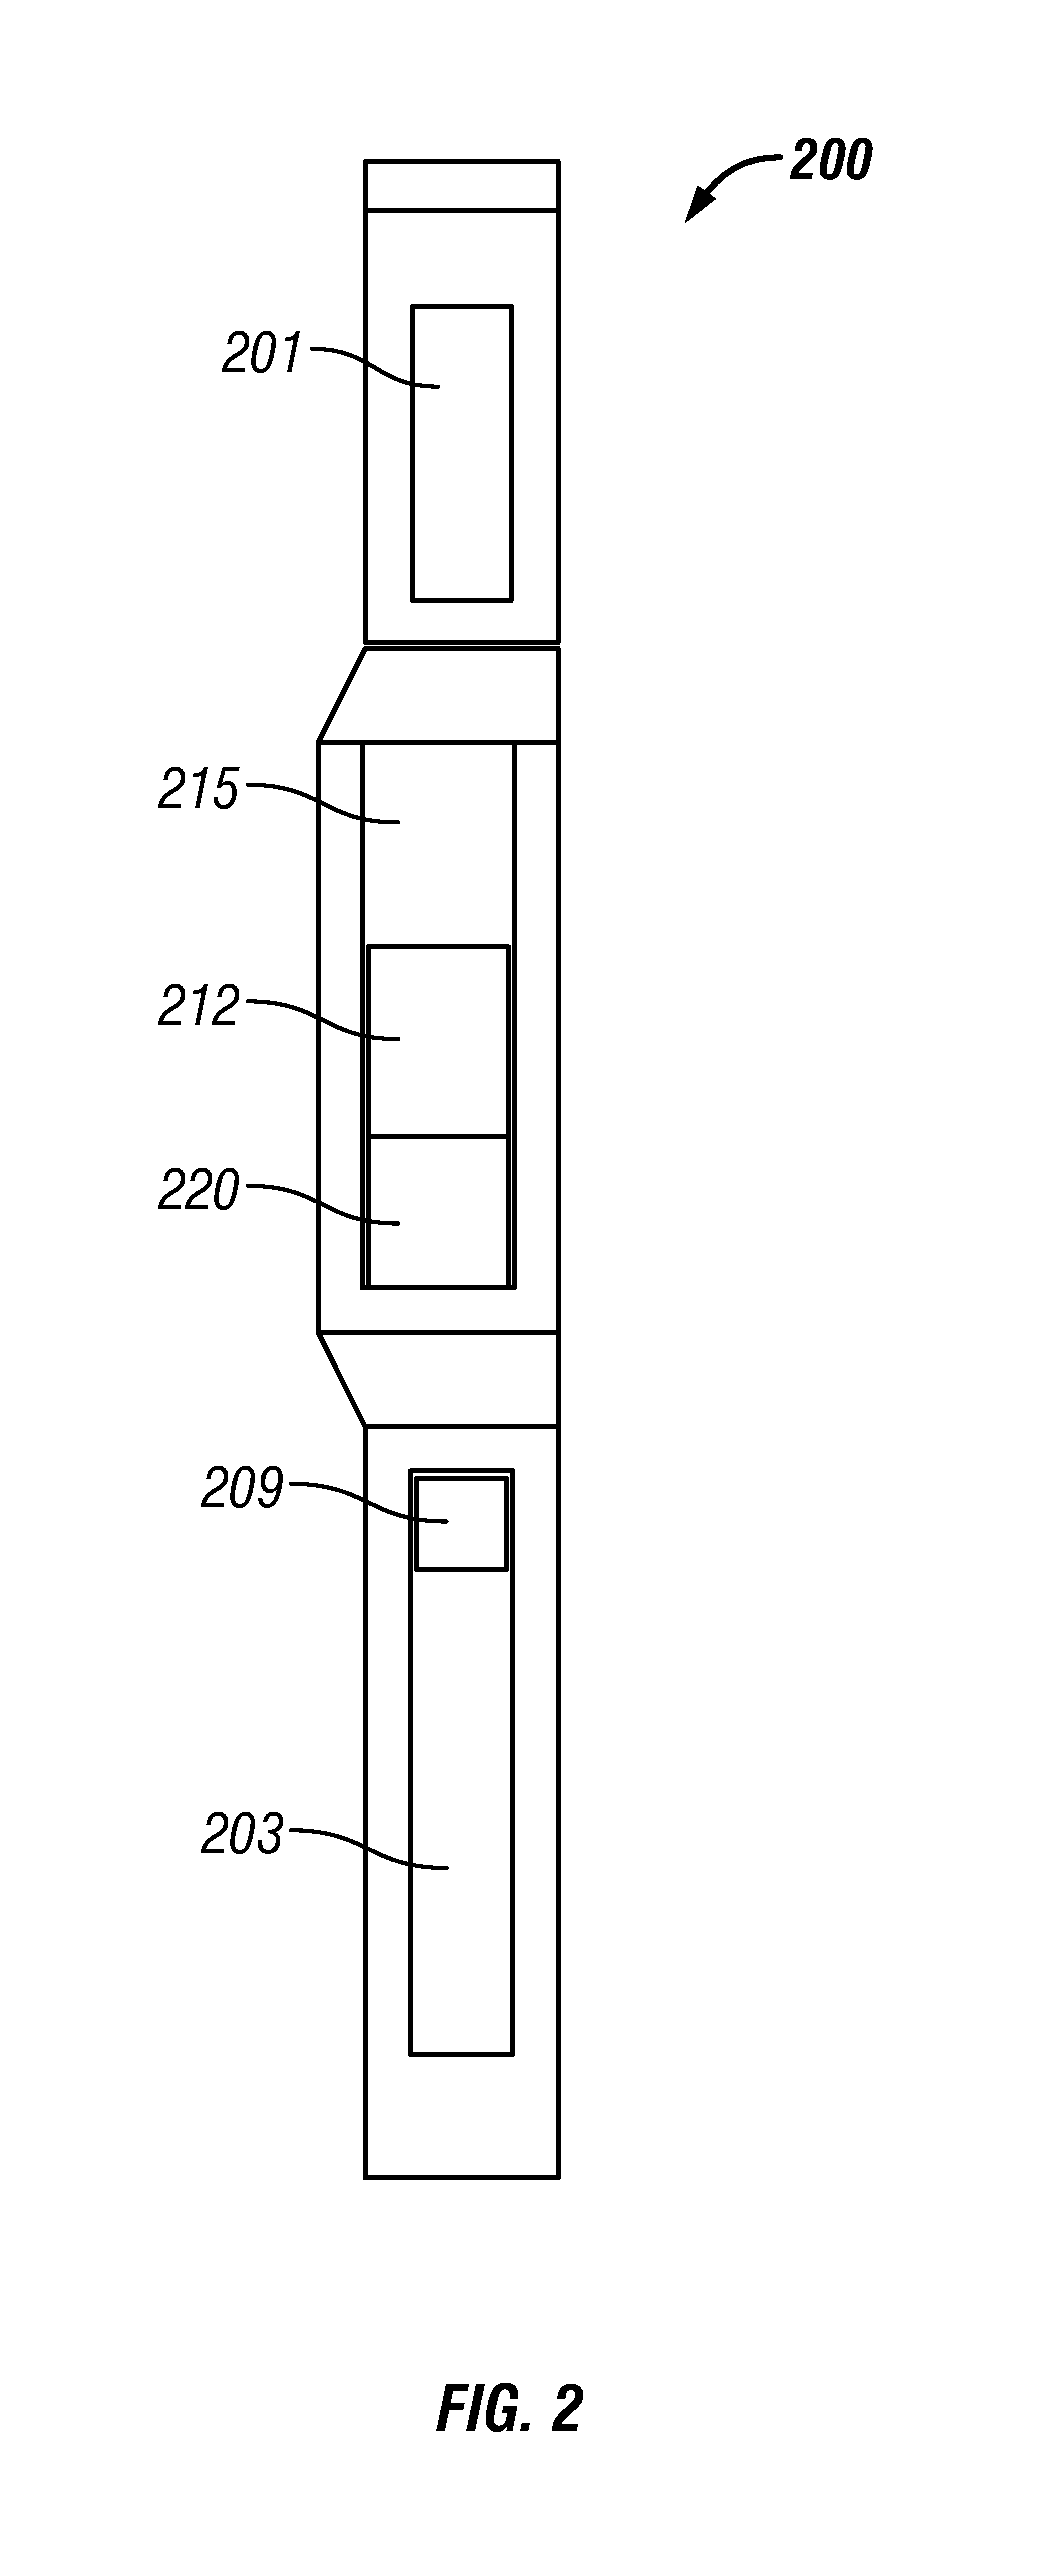 Method of detecting gas in a formation using capture cross-section from a pulsed neutron device